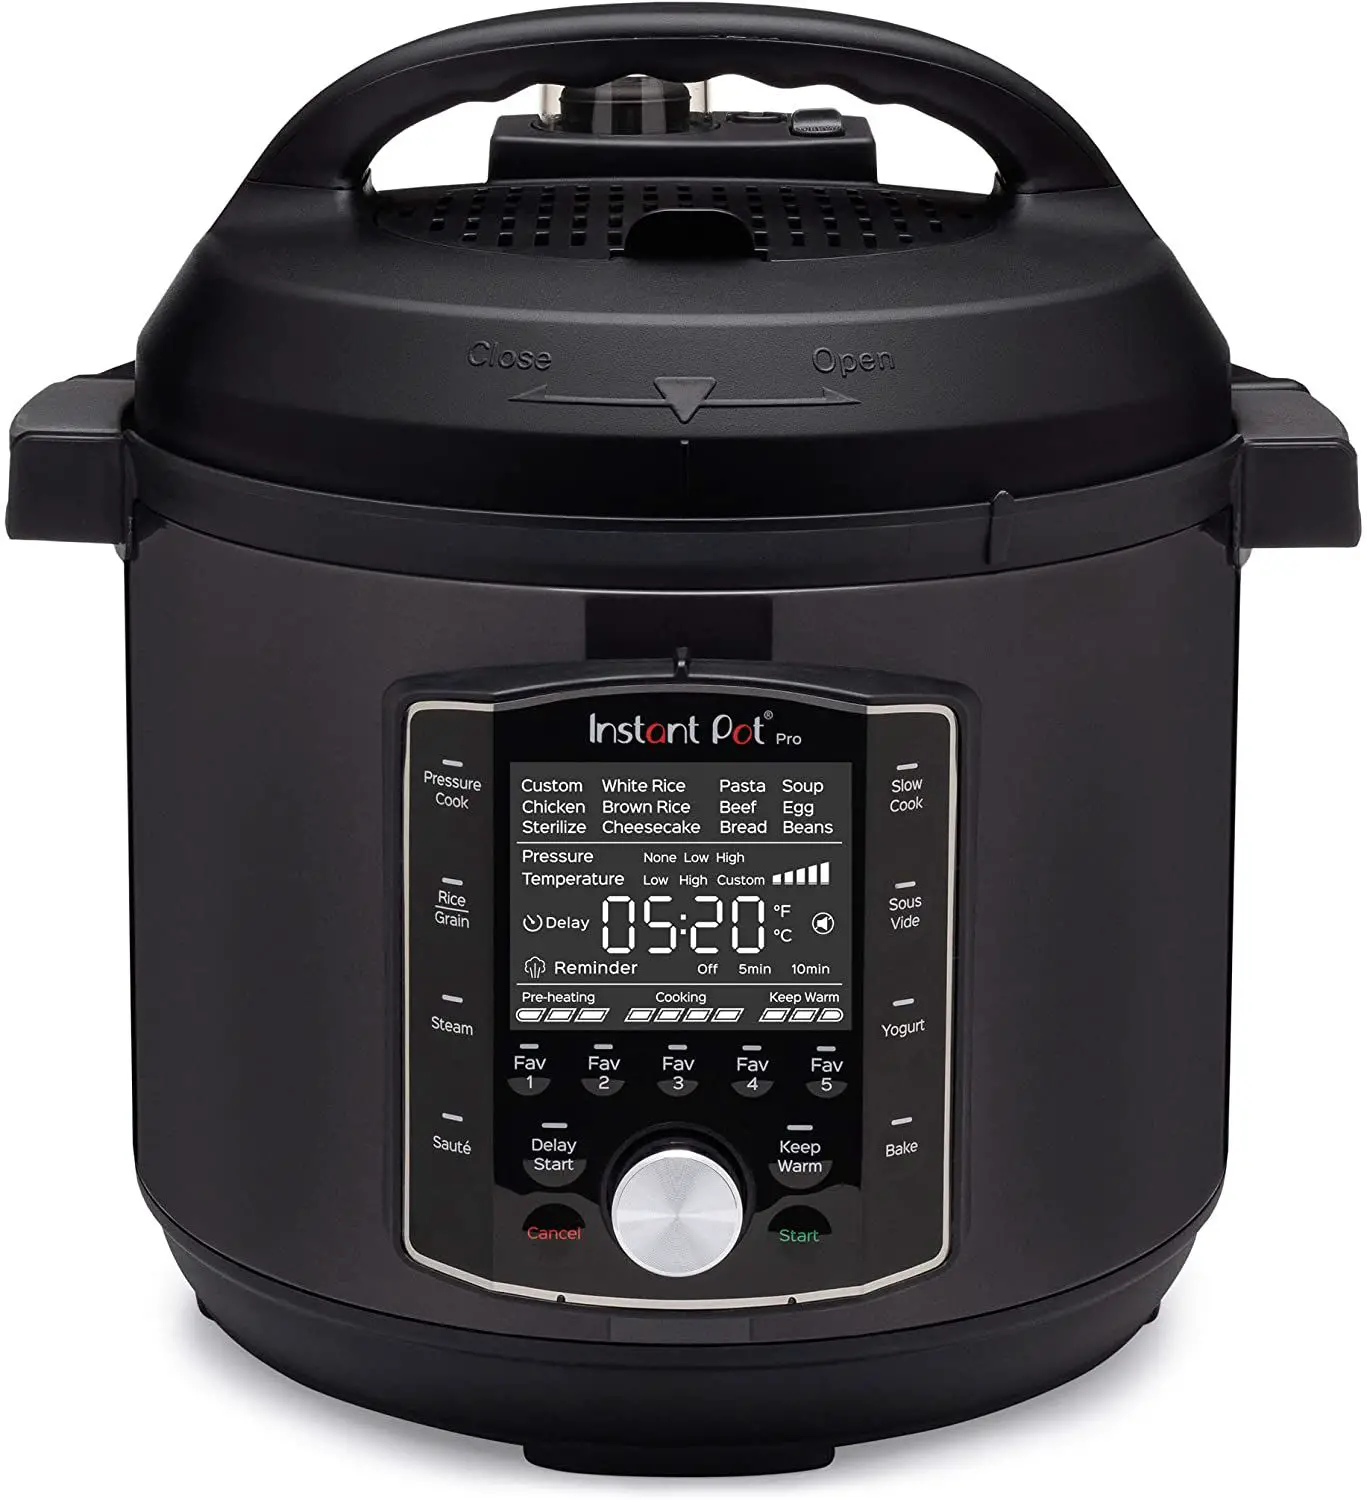 The Best Instant Pot Deals of Prime Early Access Sale 2022